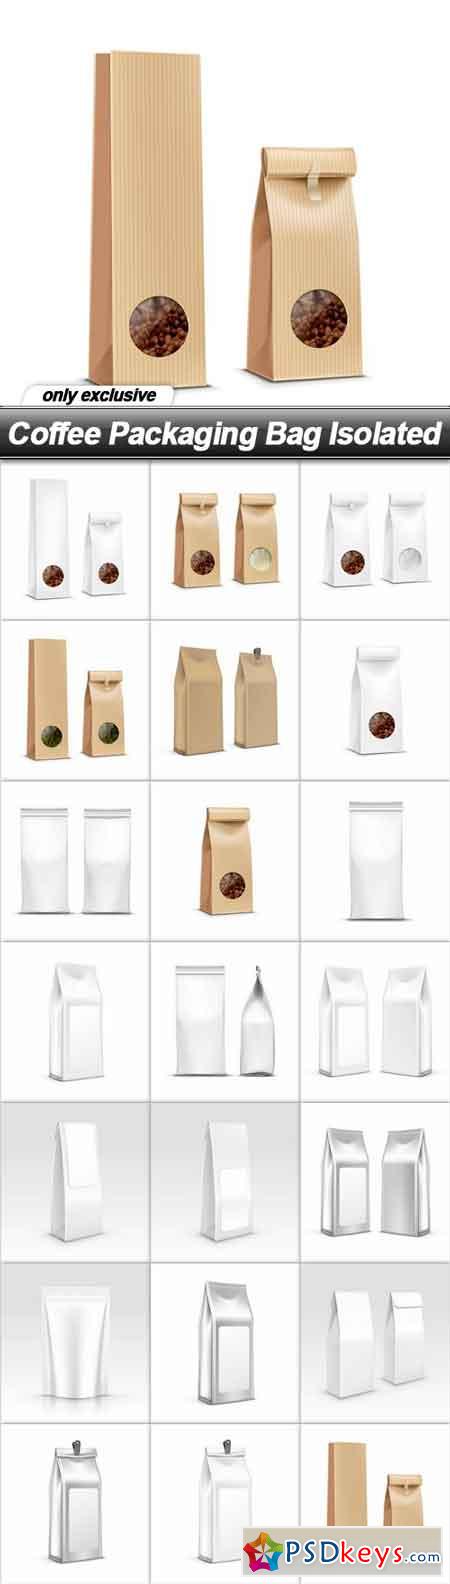 Coffee Packaging Bag Isolated - 22 EPS